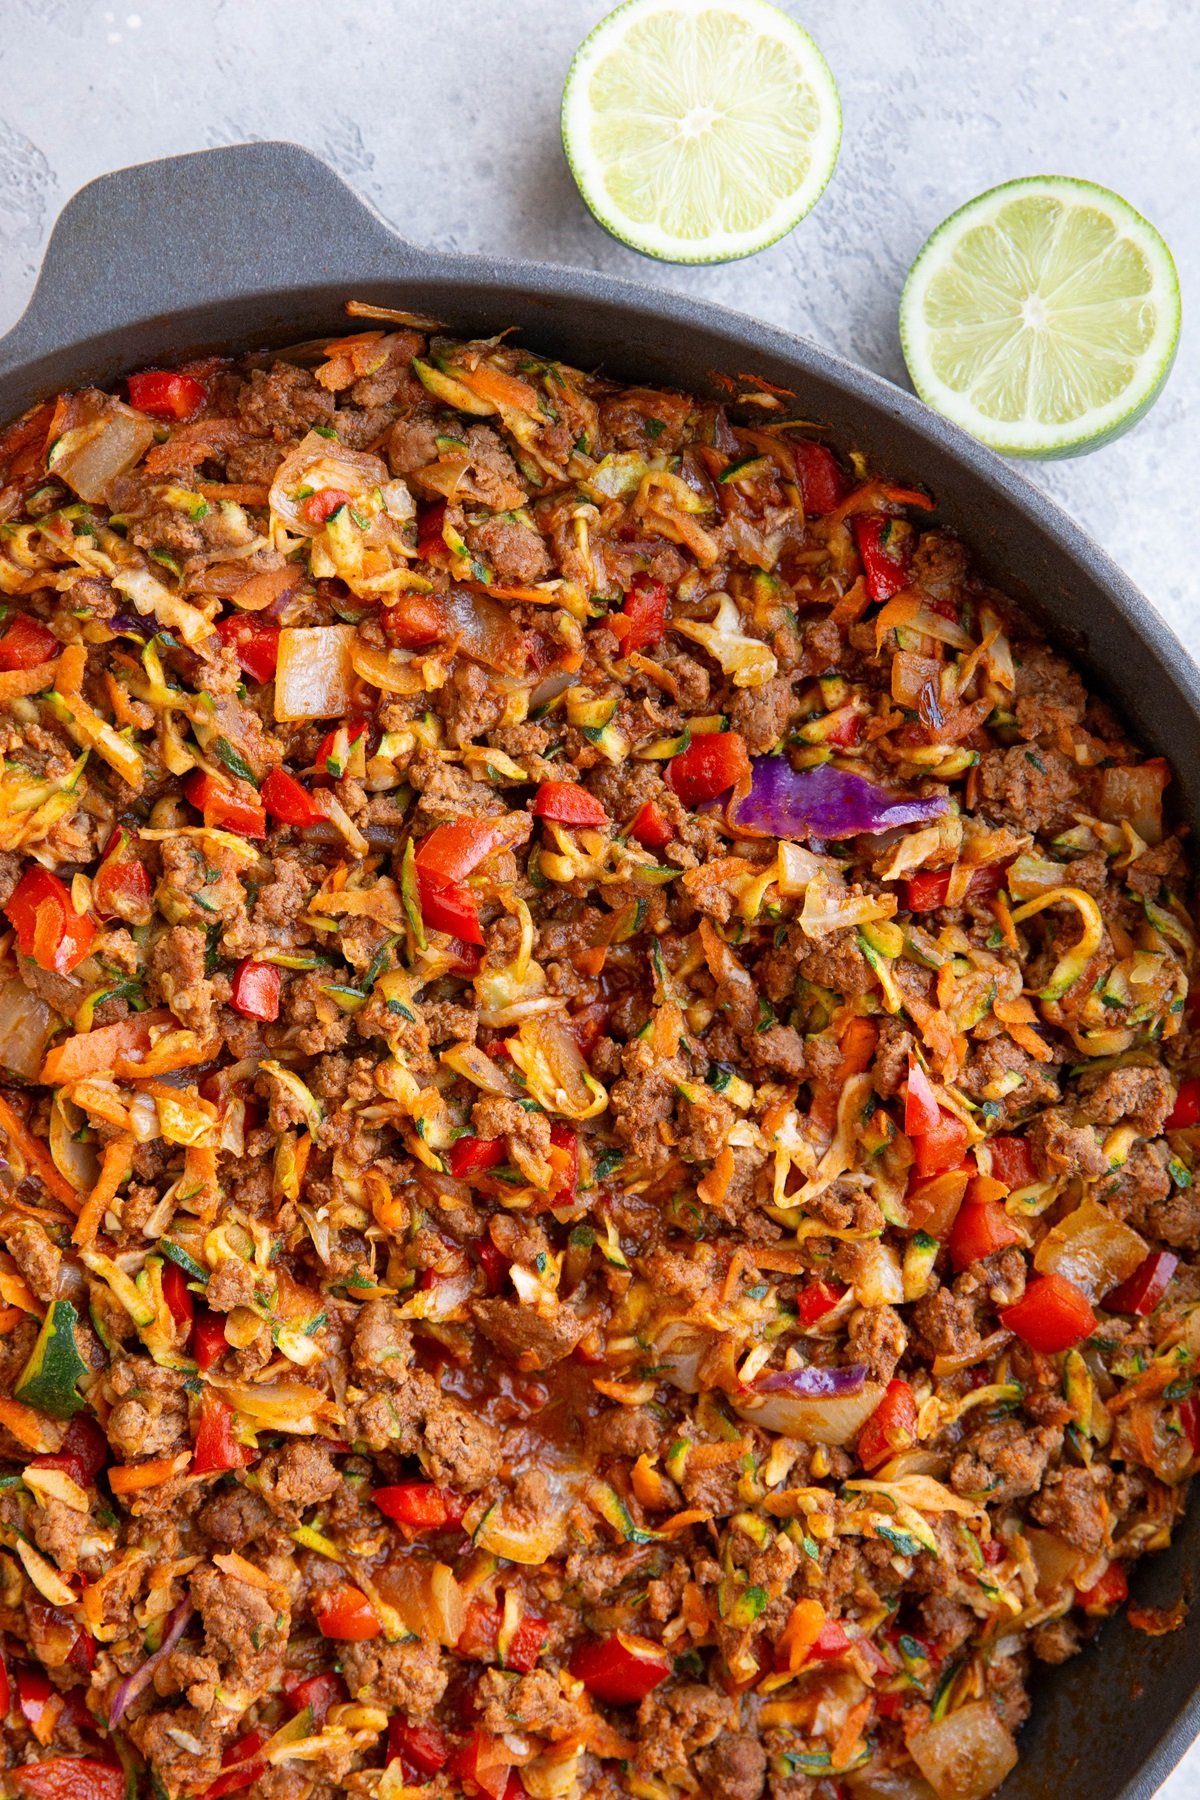 Skillet loaded with ground beef, vegetables and Mexican seasonings for a healthy dinner.